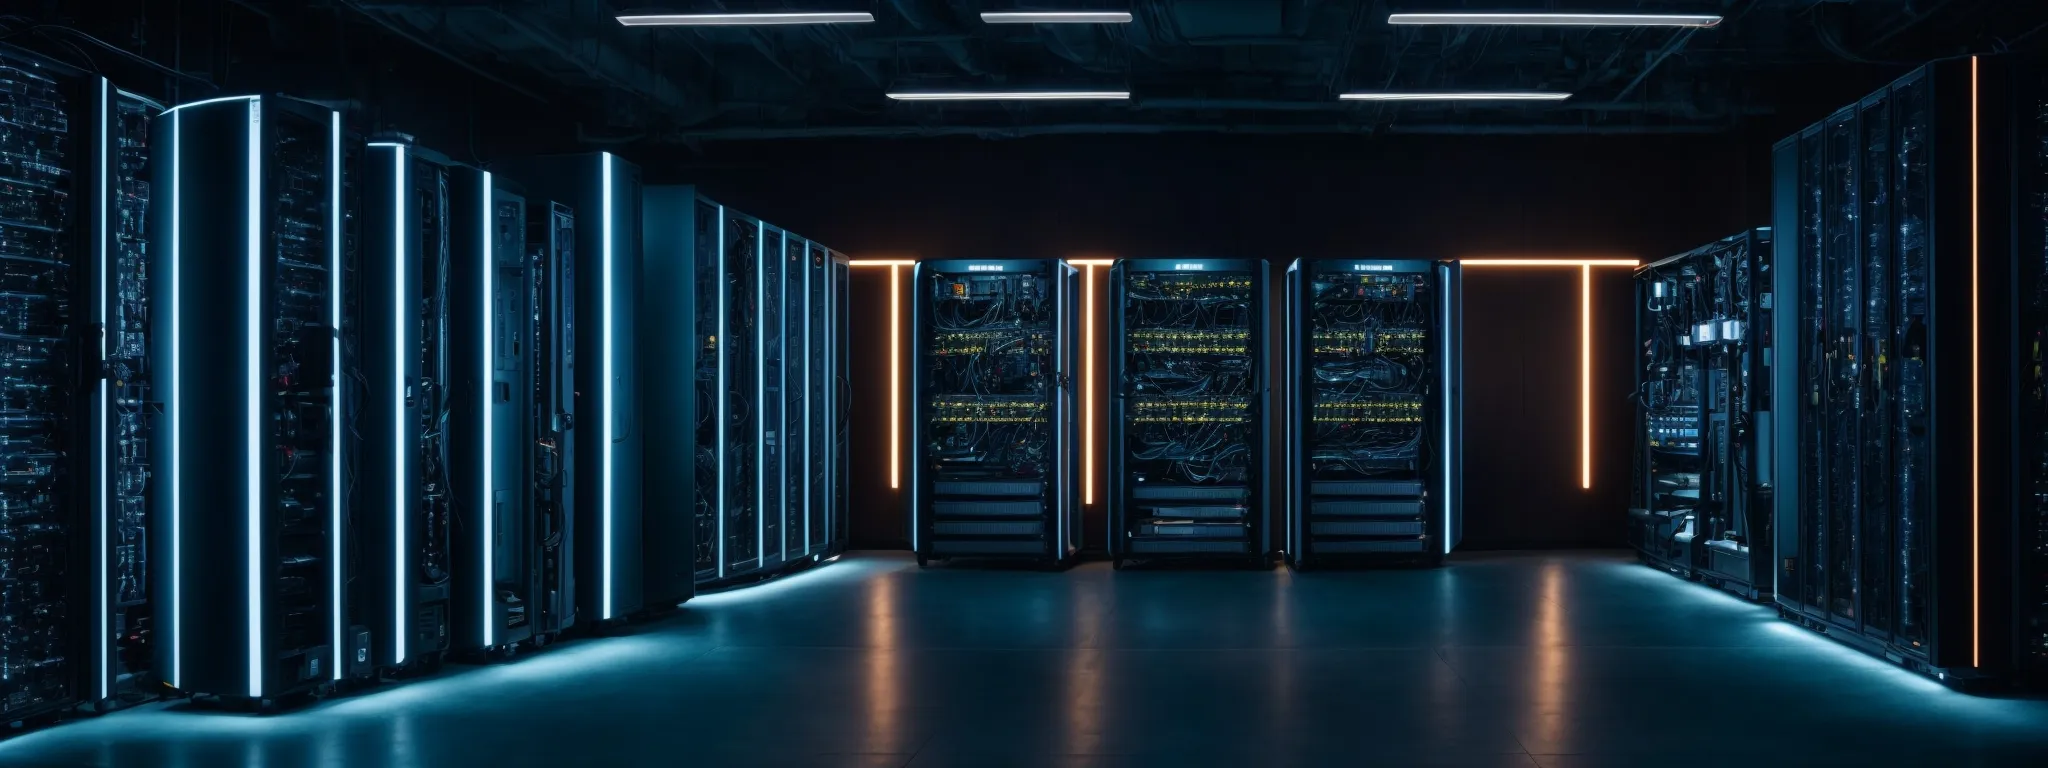 a streamlined, high-tech server room with glowing lights and racks of equipment symbolizing a hub of data management expertise.